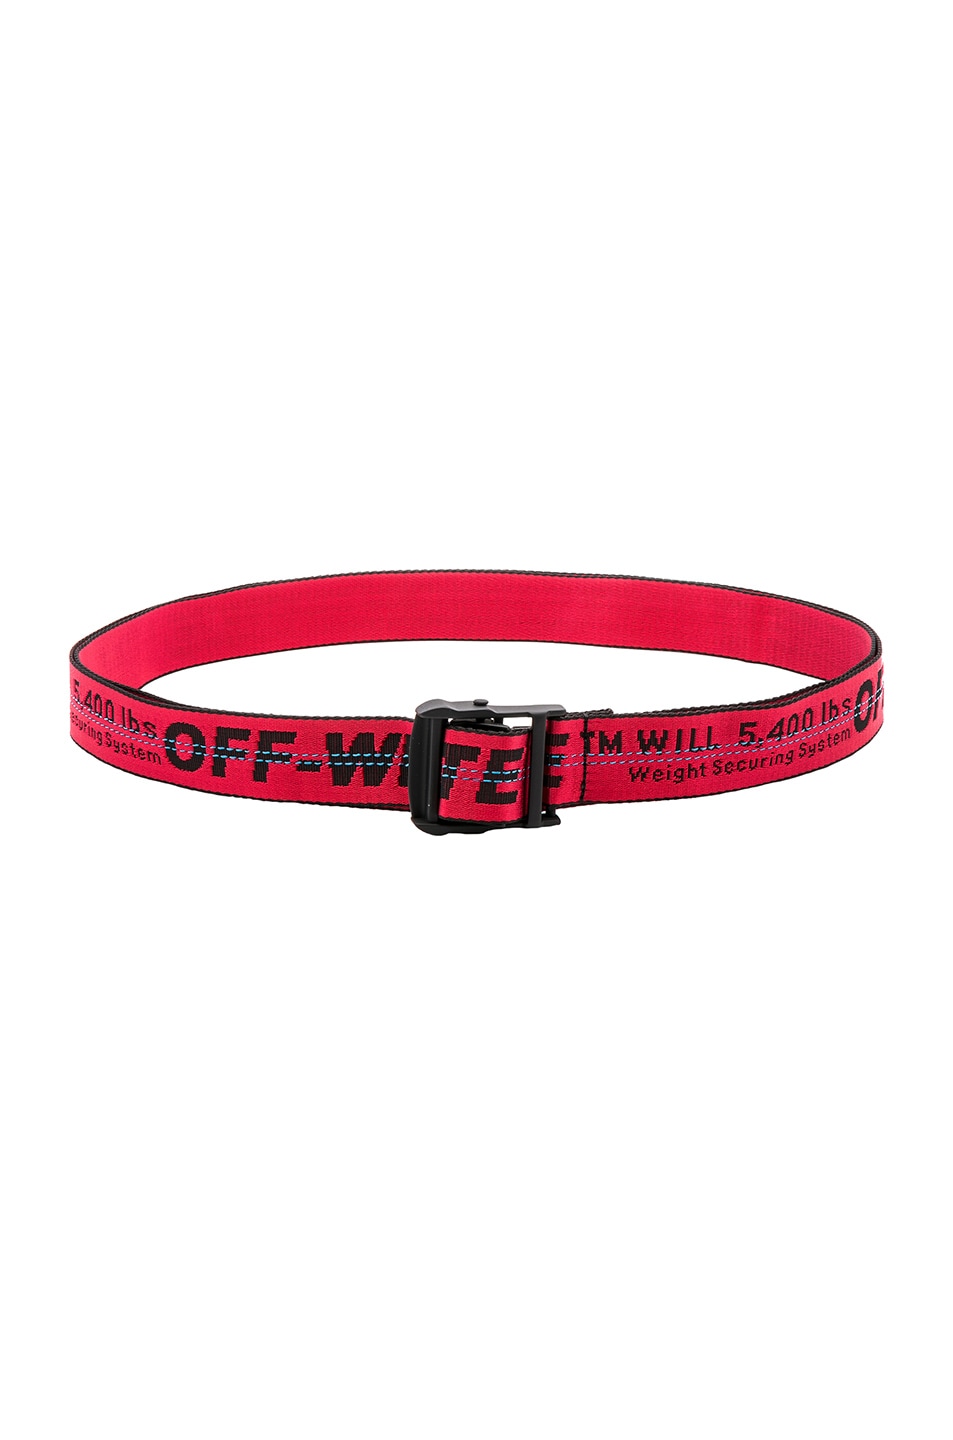 off white belt red and black